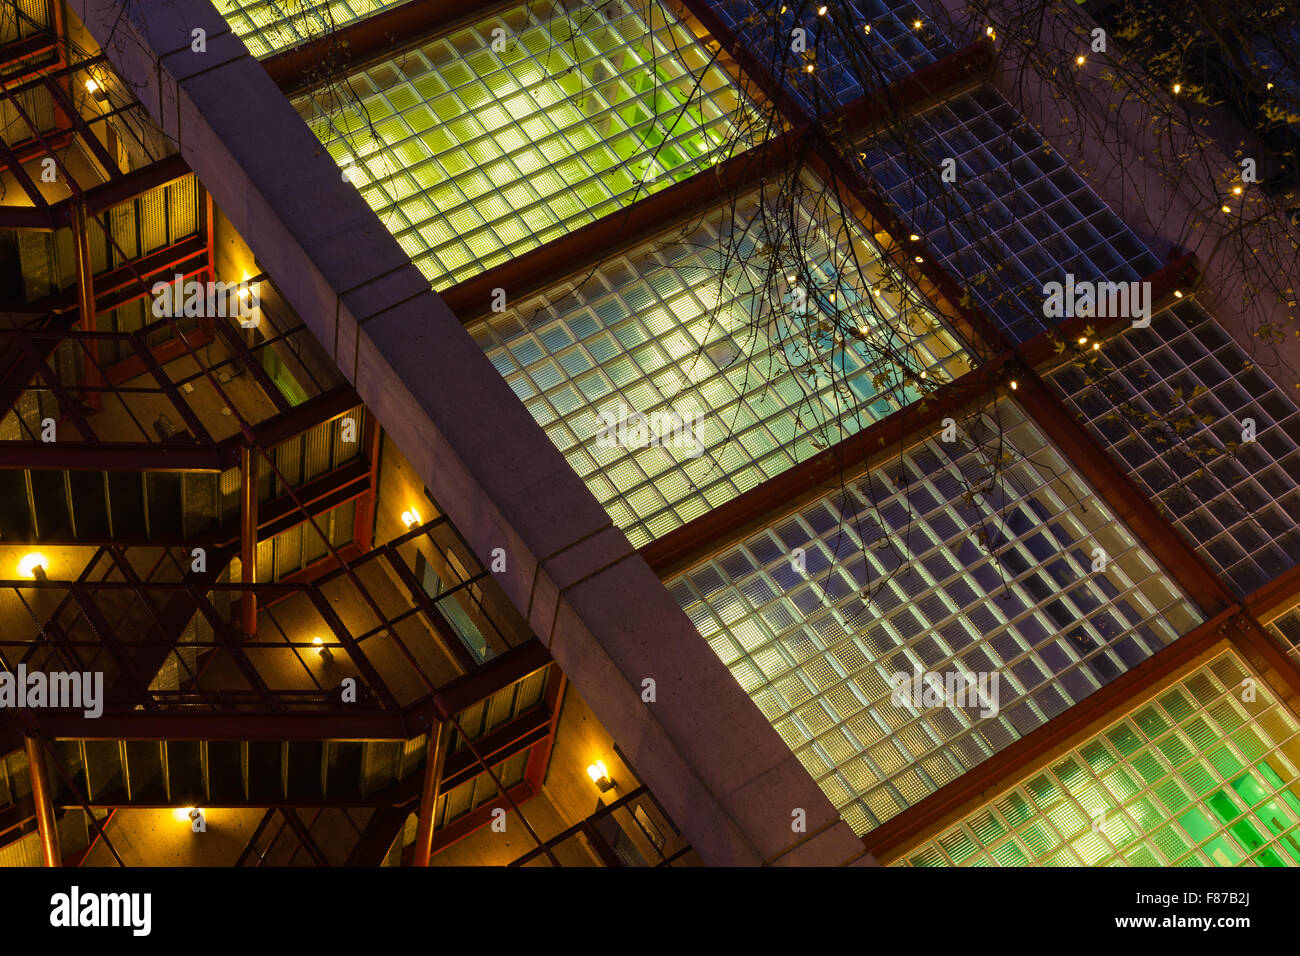 Abstract view of a multi-storey parking lot in Gastown, Vancouver Stock Photo